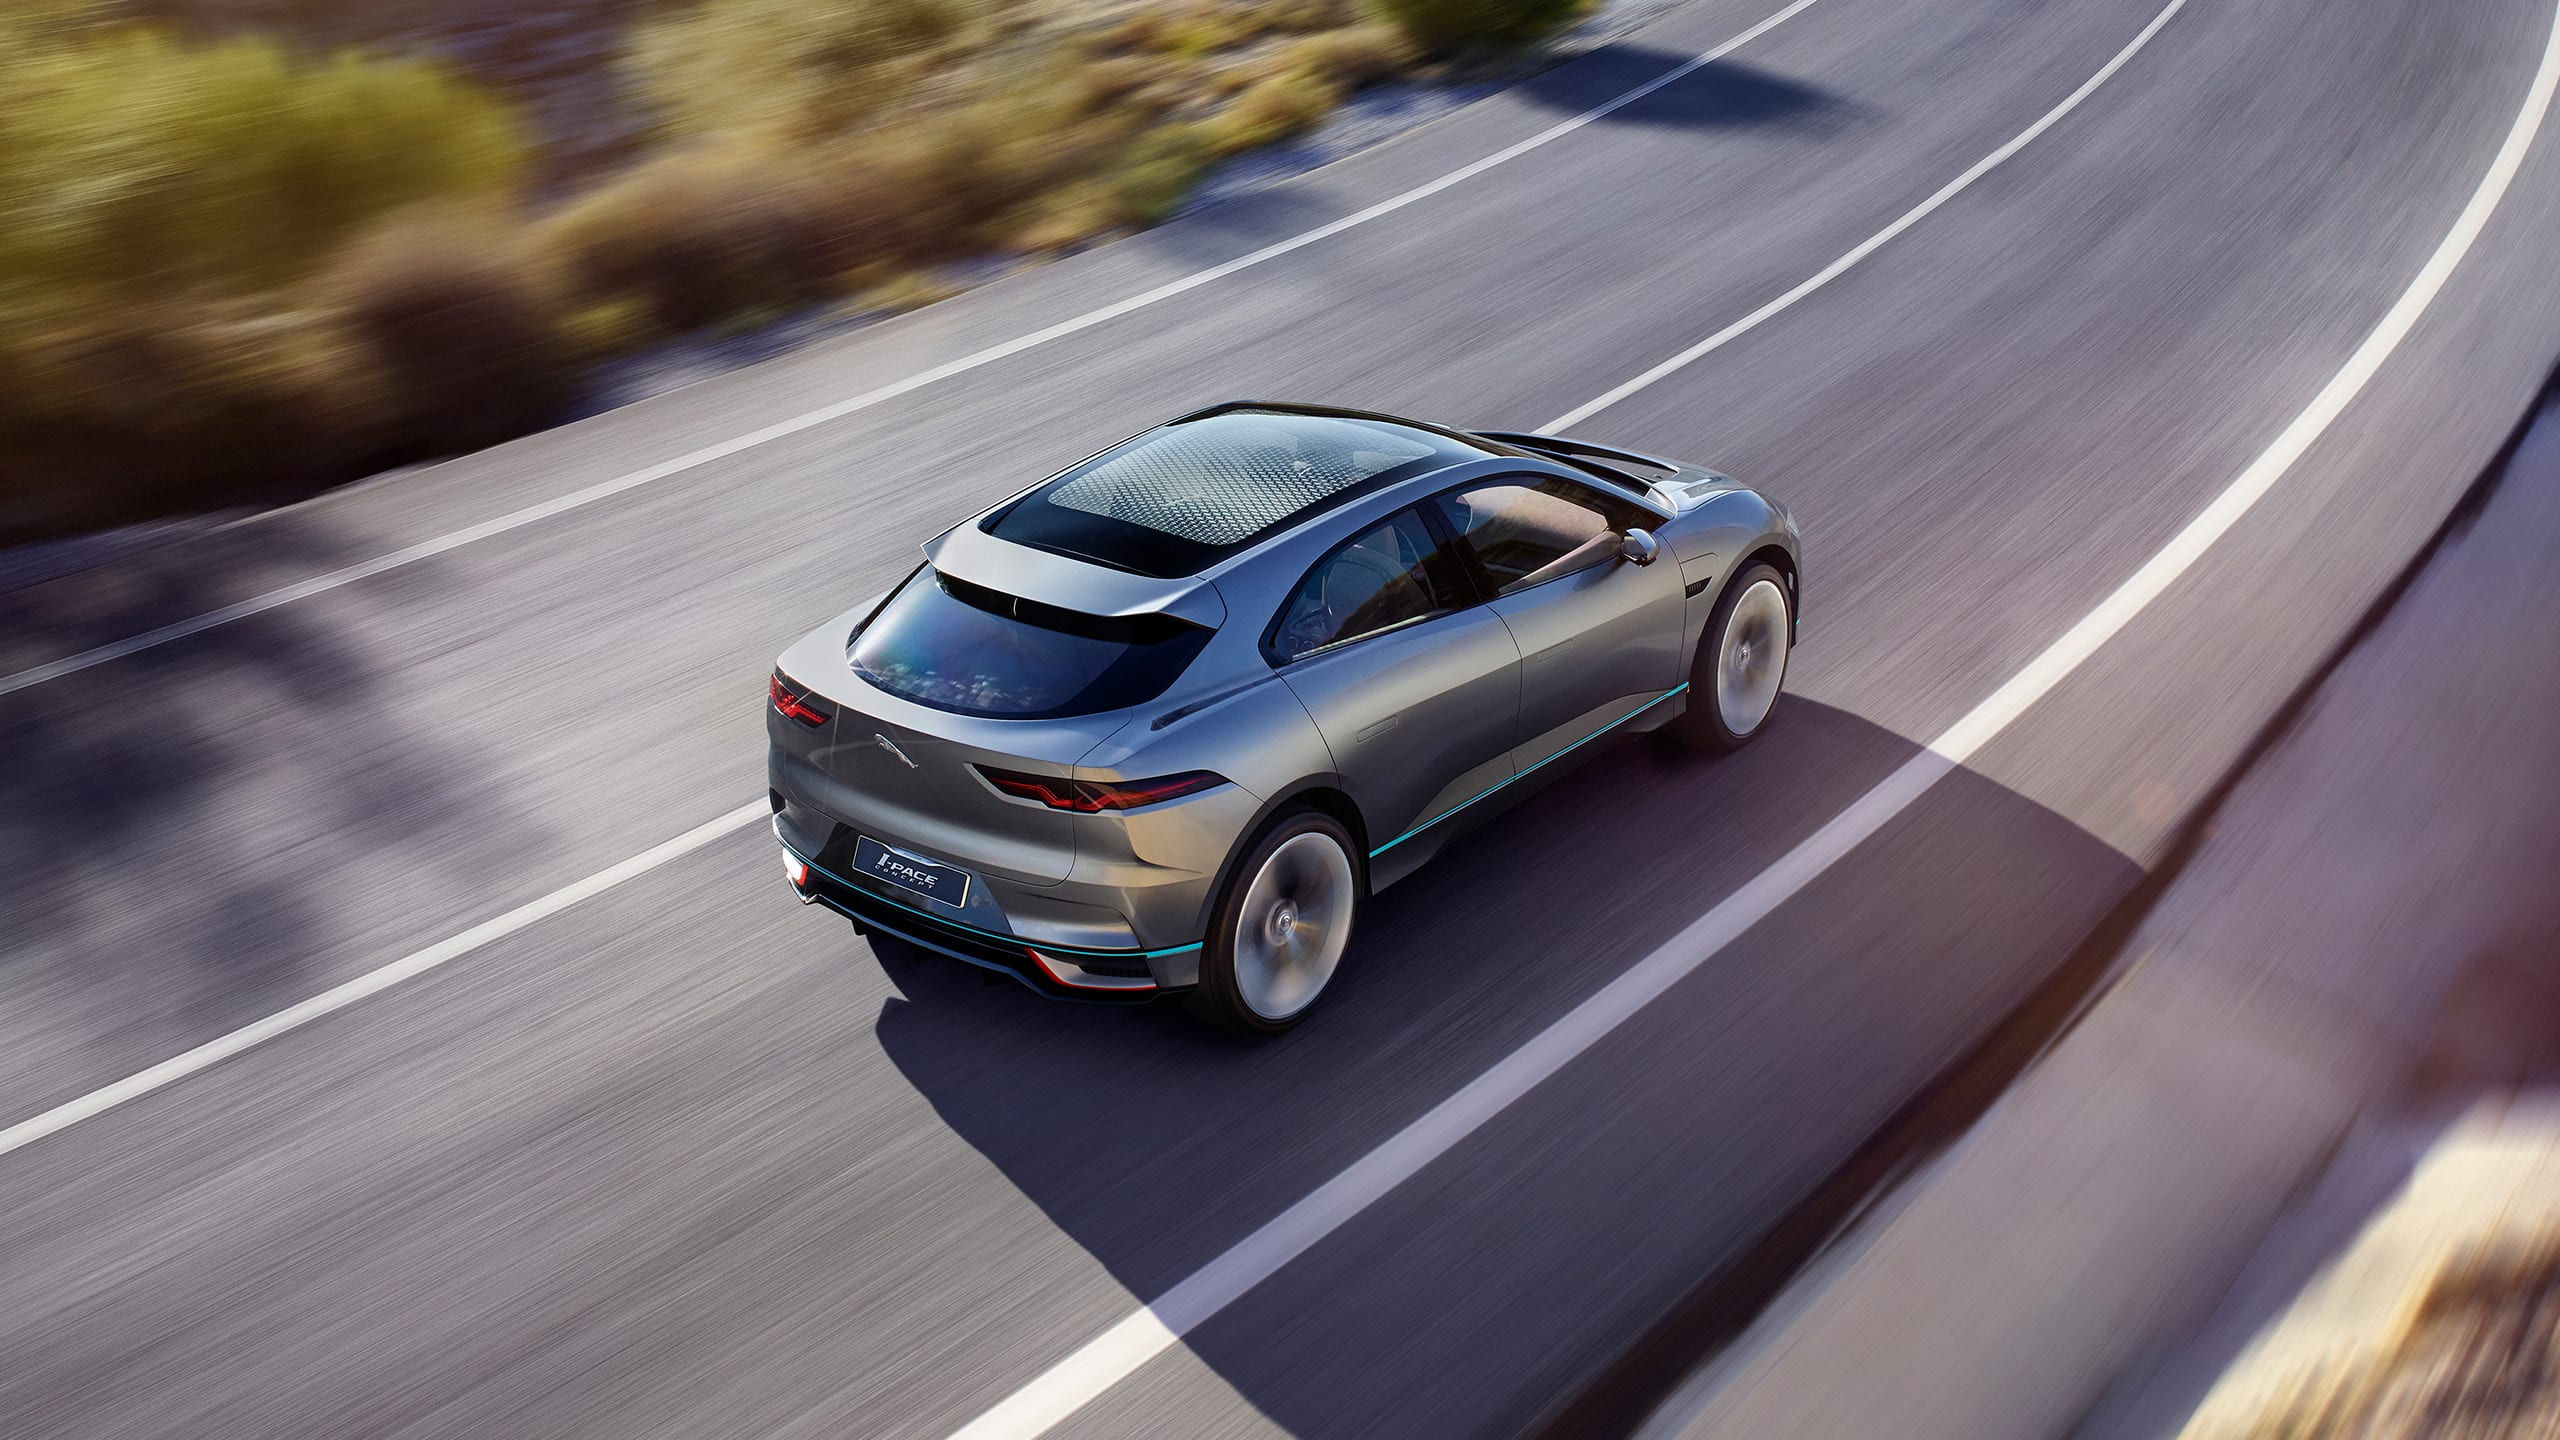 Jaguar I-Pace electric running on road